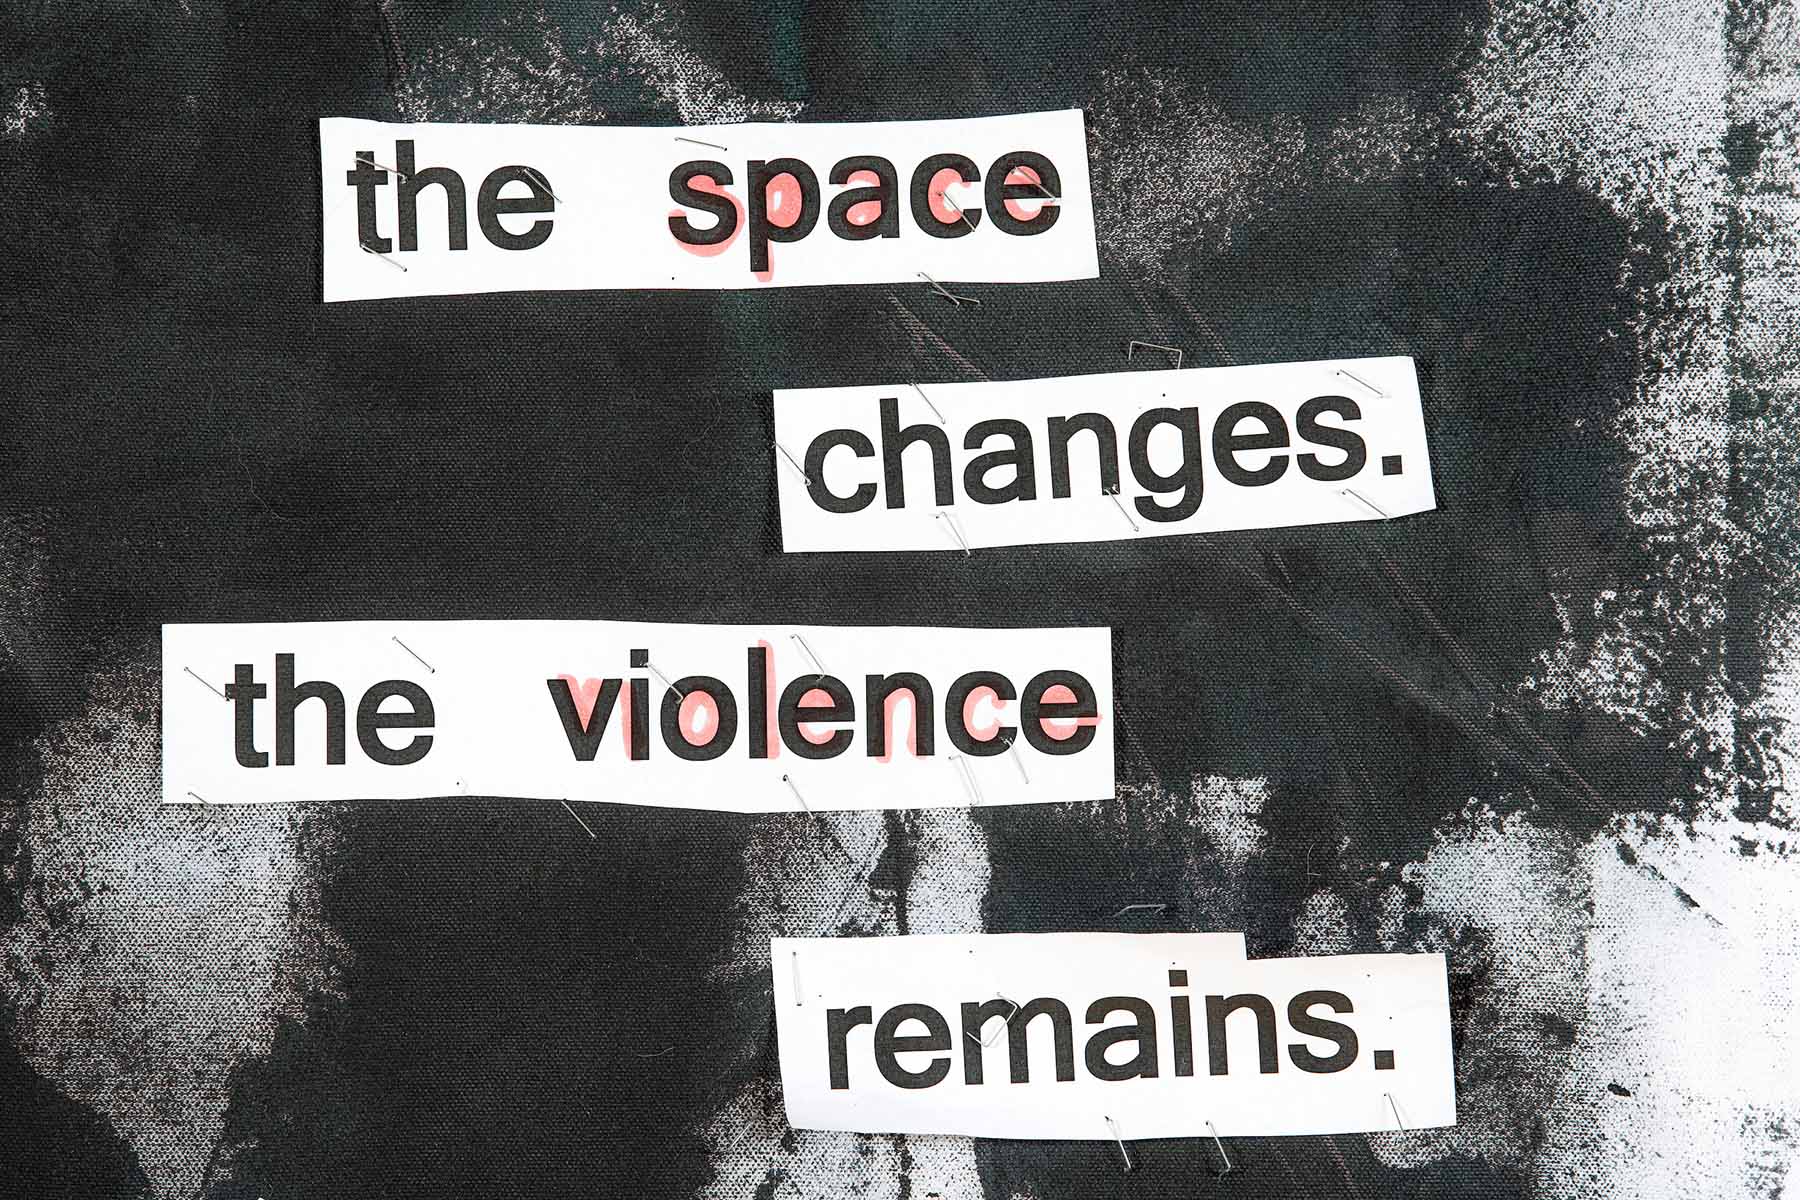 A close-up photograph of the mixed media art piece with word fragments reading, 'the space changes. the vionlence remains.'